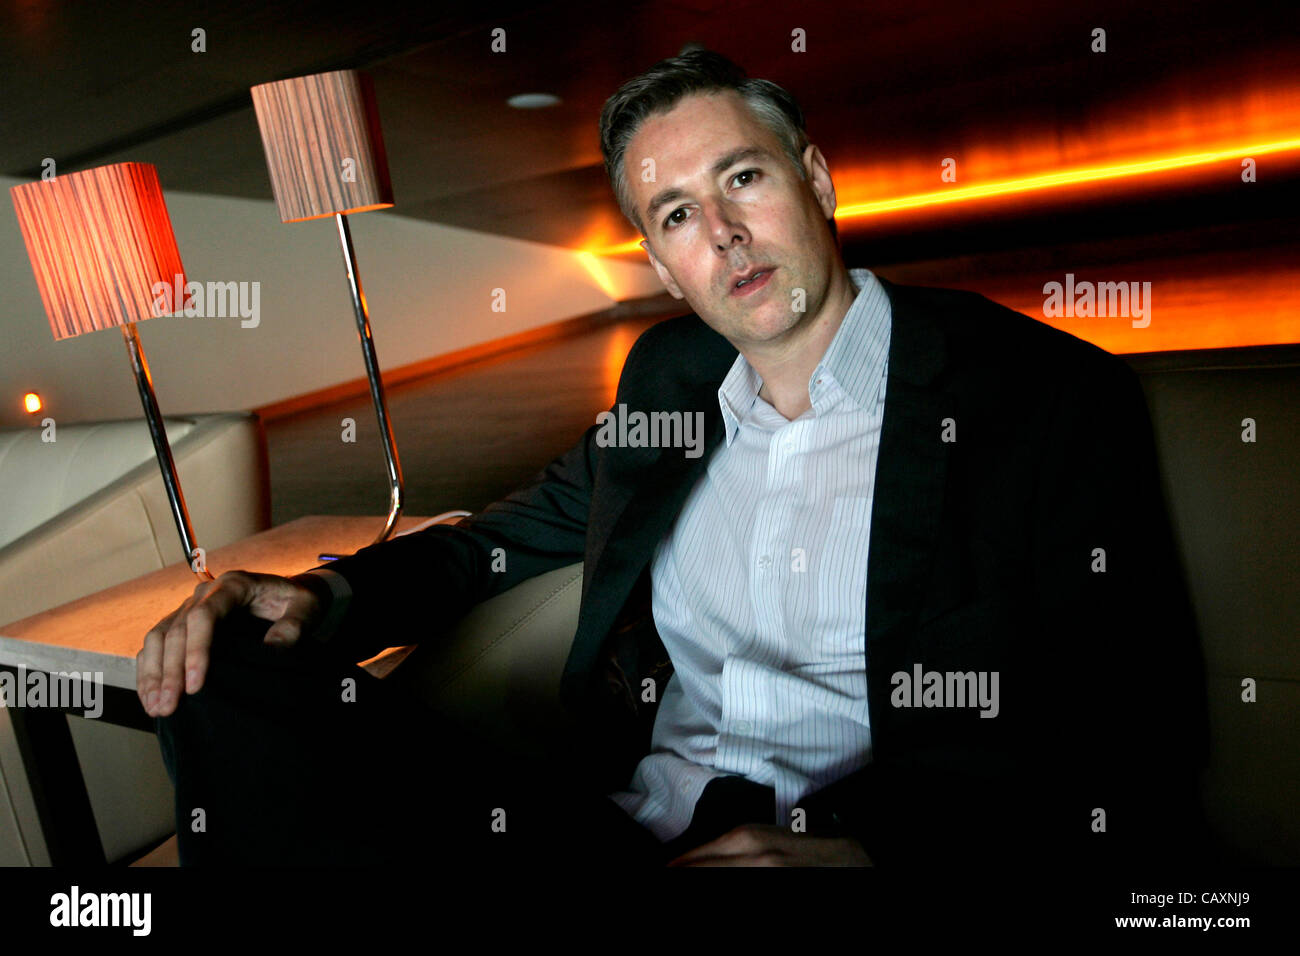 Jun 20, 2009 - Los Angeles, California, USA - ADAM YAUCH has a indie film distribution enterprise called Oscilloscope Laboratories. He is best known as the bassist of seminal hip-hop group Beastie Boys. photographed at the Landmark Theaters during the Los Angeles Independent Film Festival (Credit Im Stock Photo